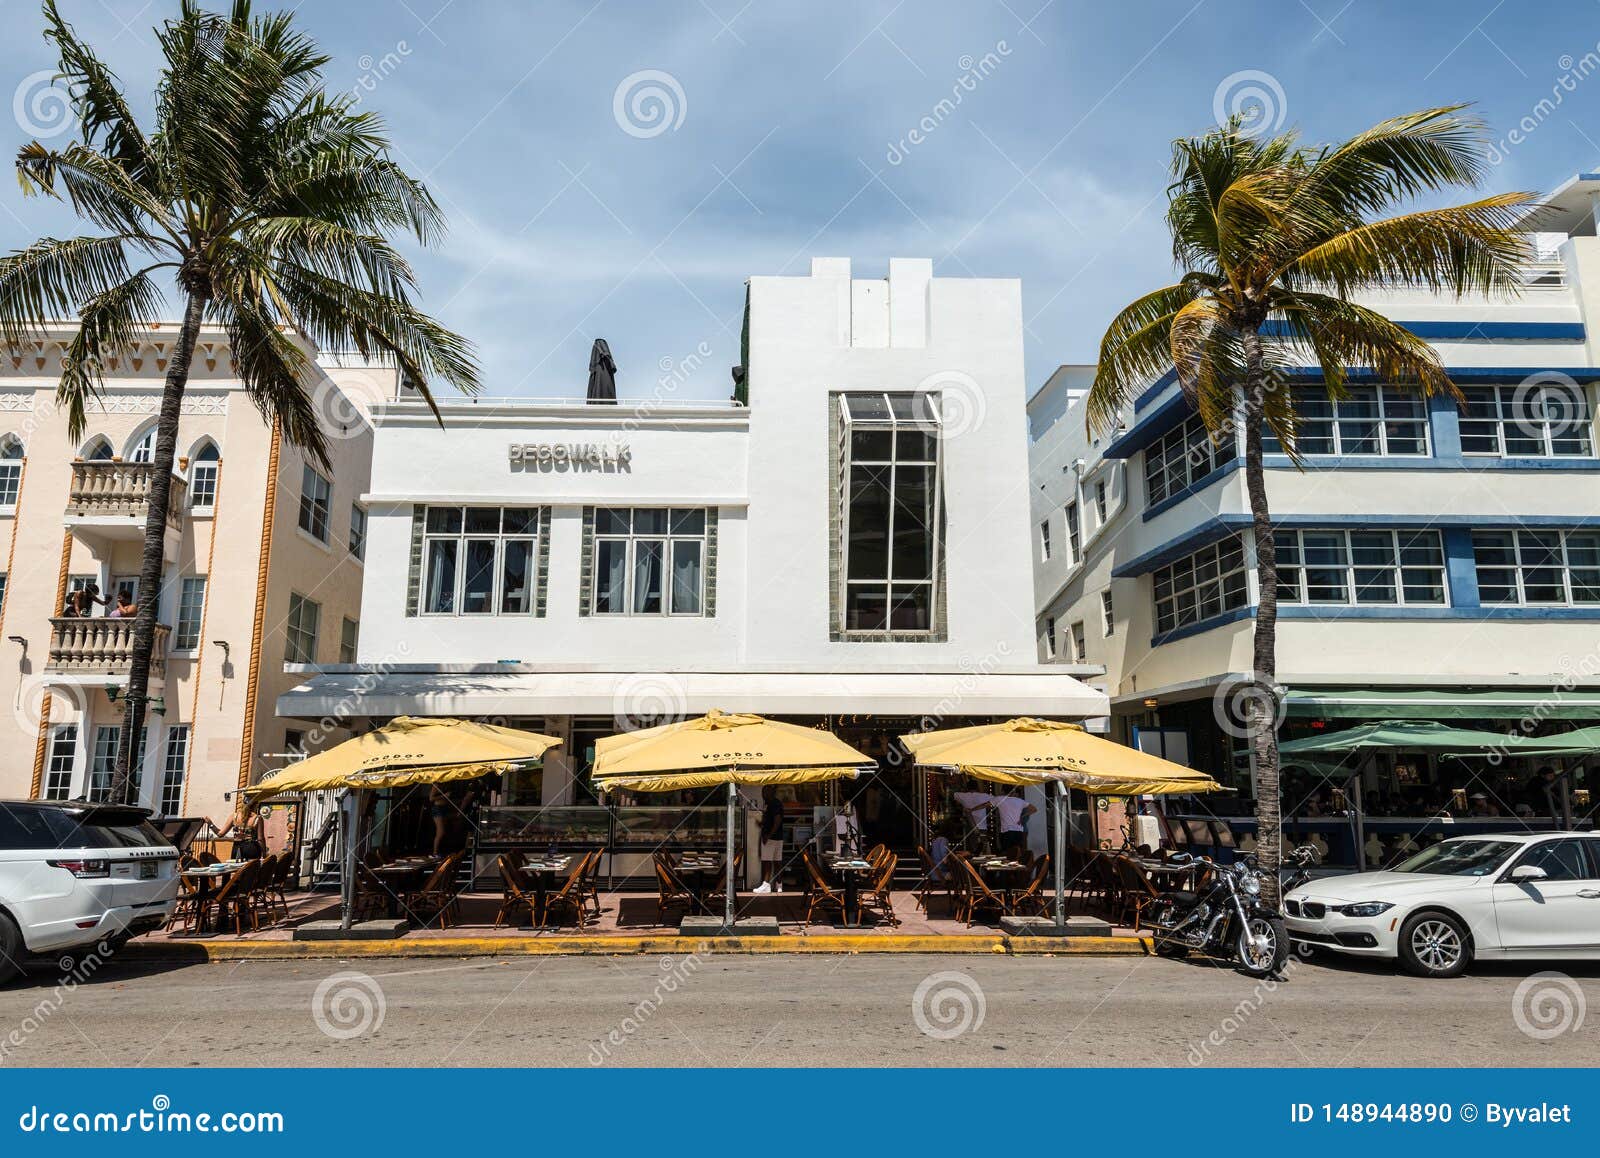 Deco Walk Hostel South Beach in Miami, Florida, United Startes of America  Editorial Image - Image of building, colorful: 148944890